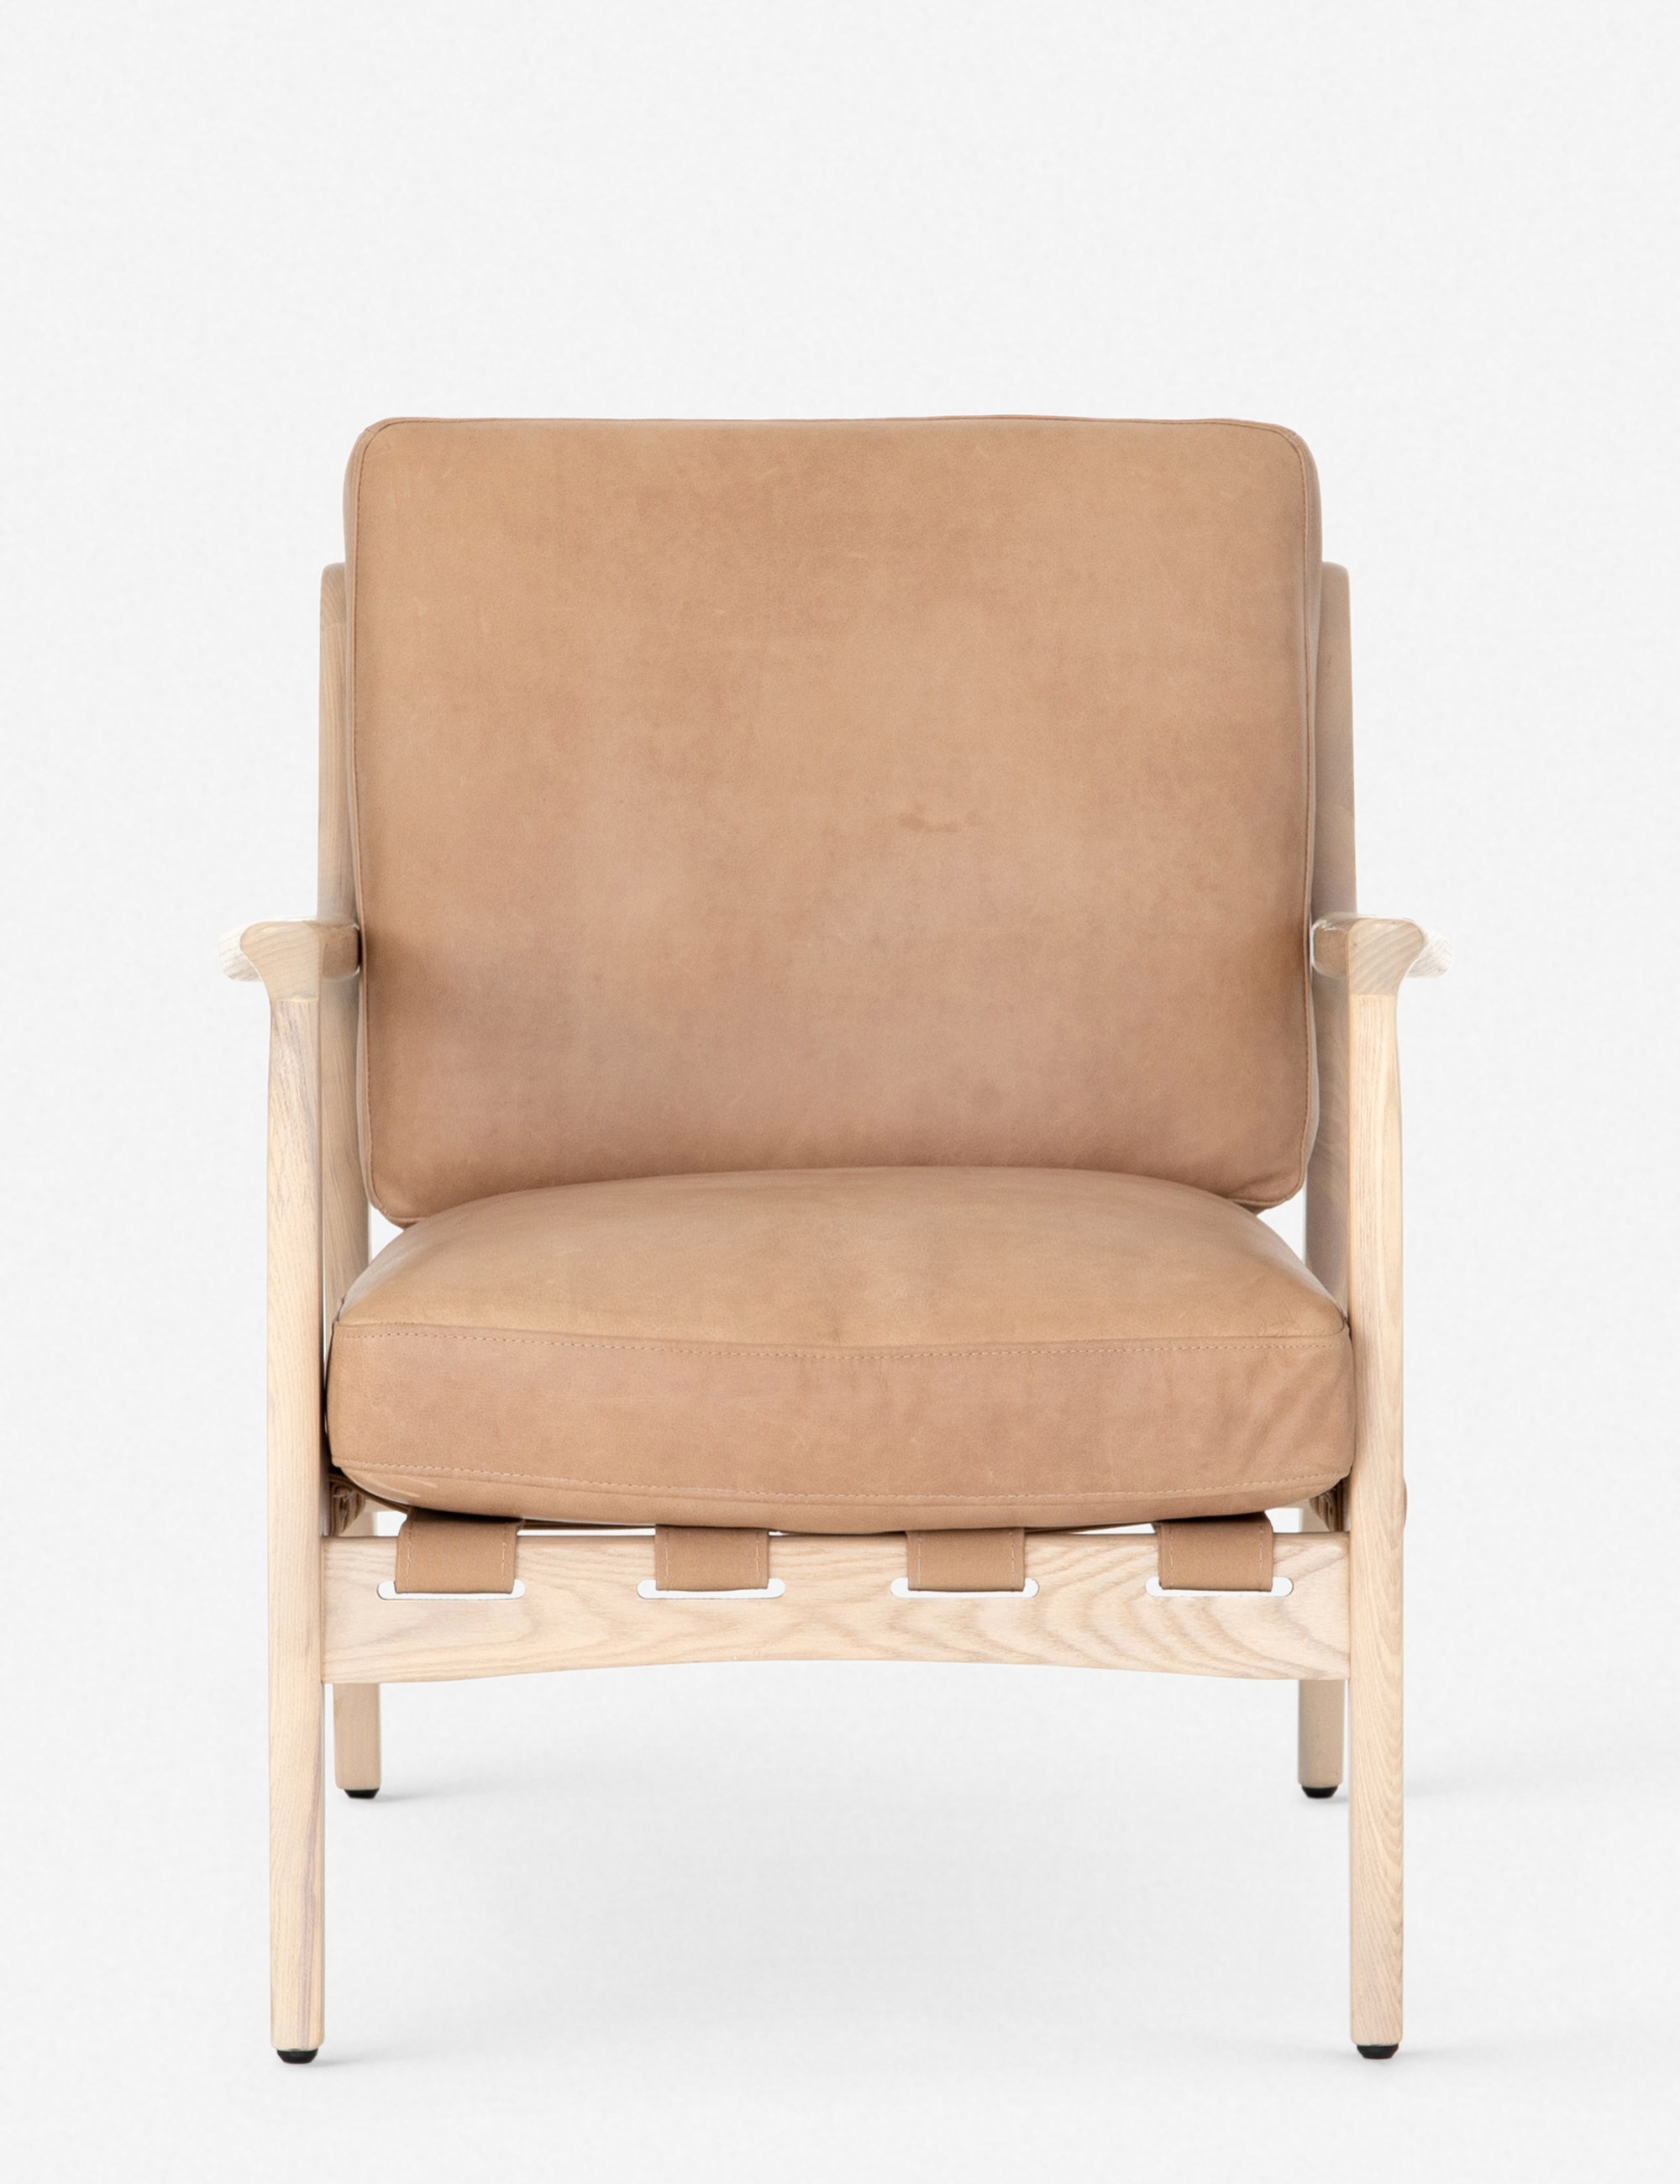 Kenneth Leather Chair - Image 1